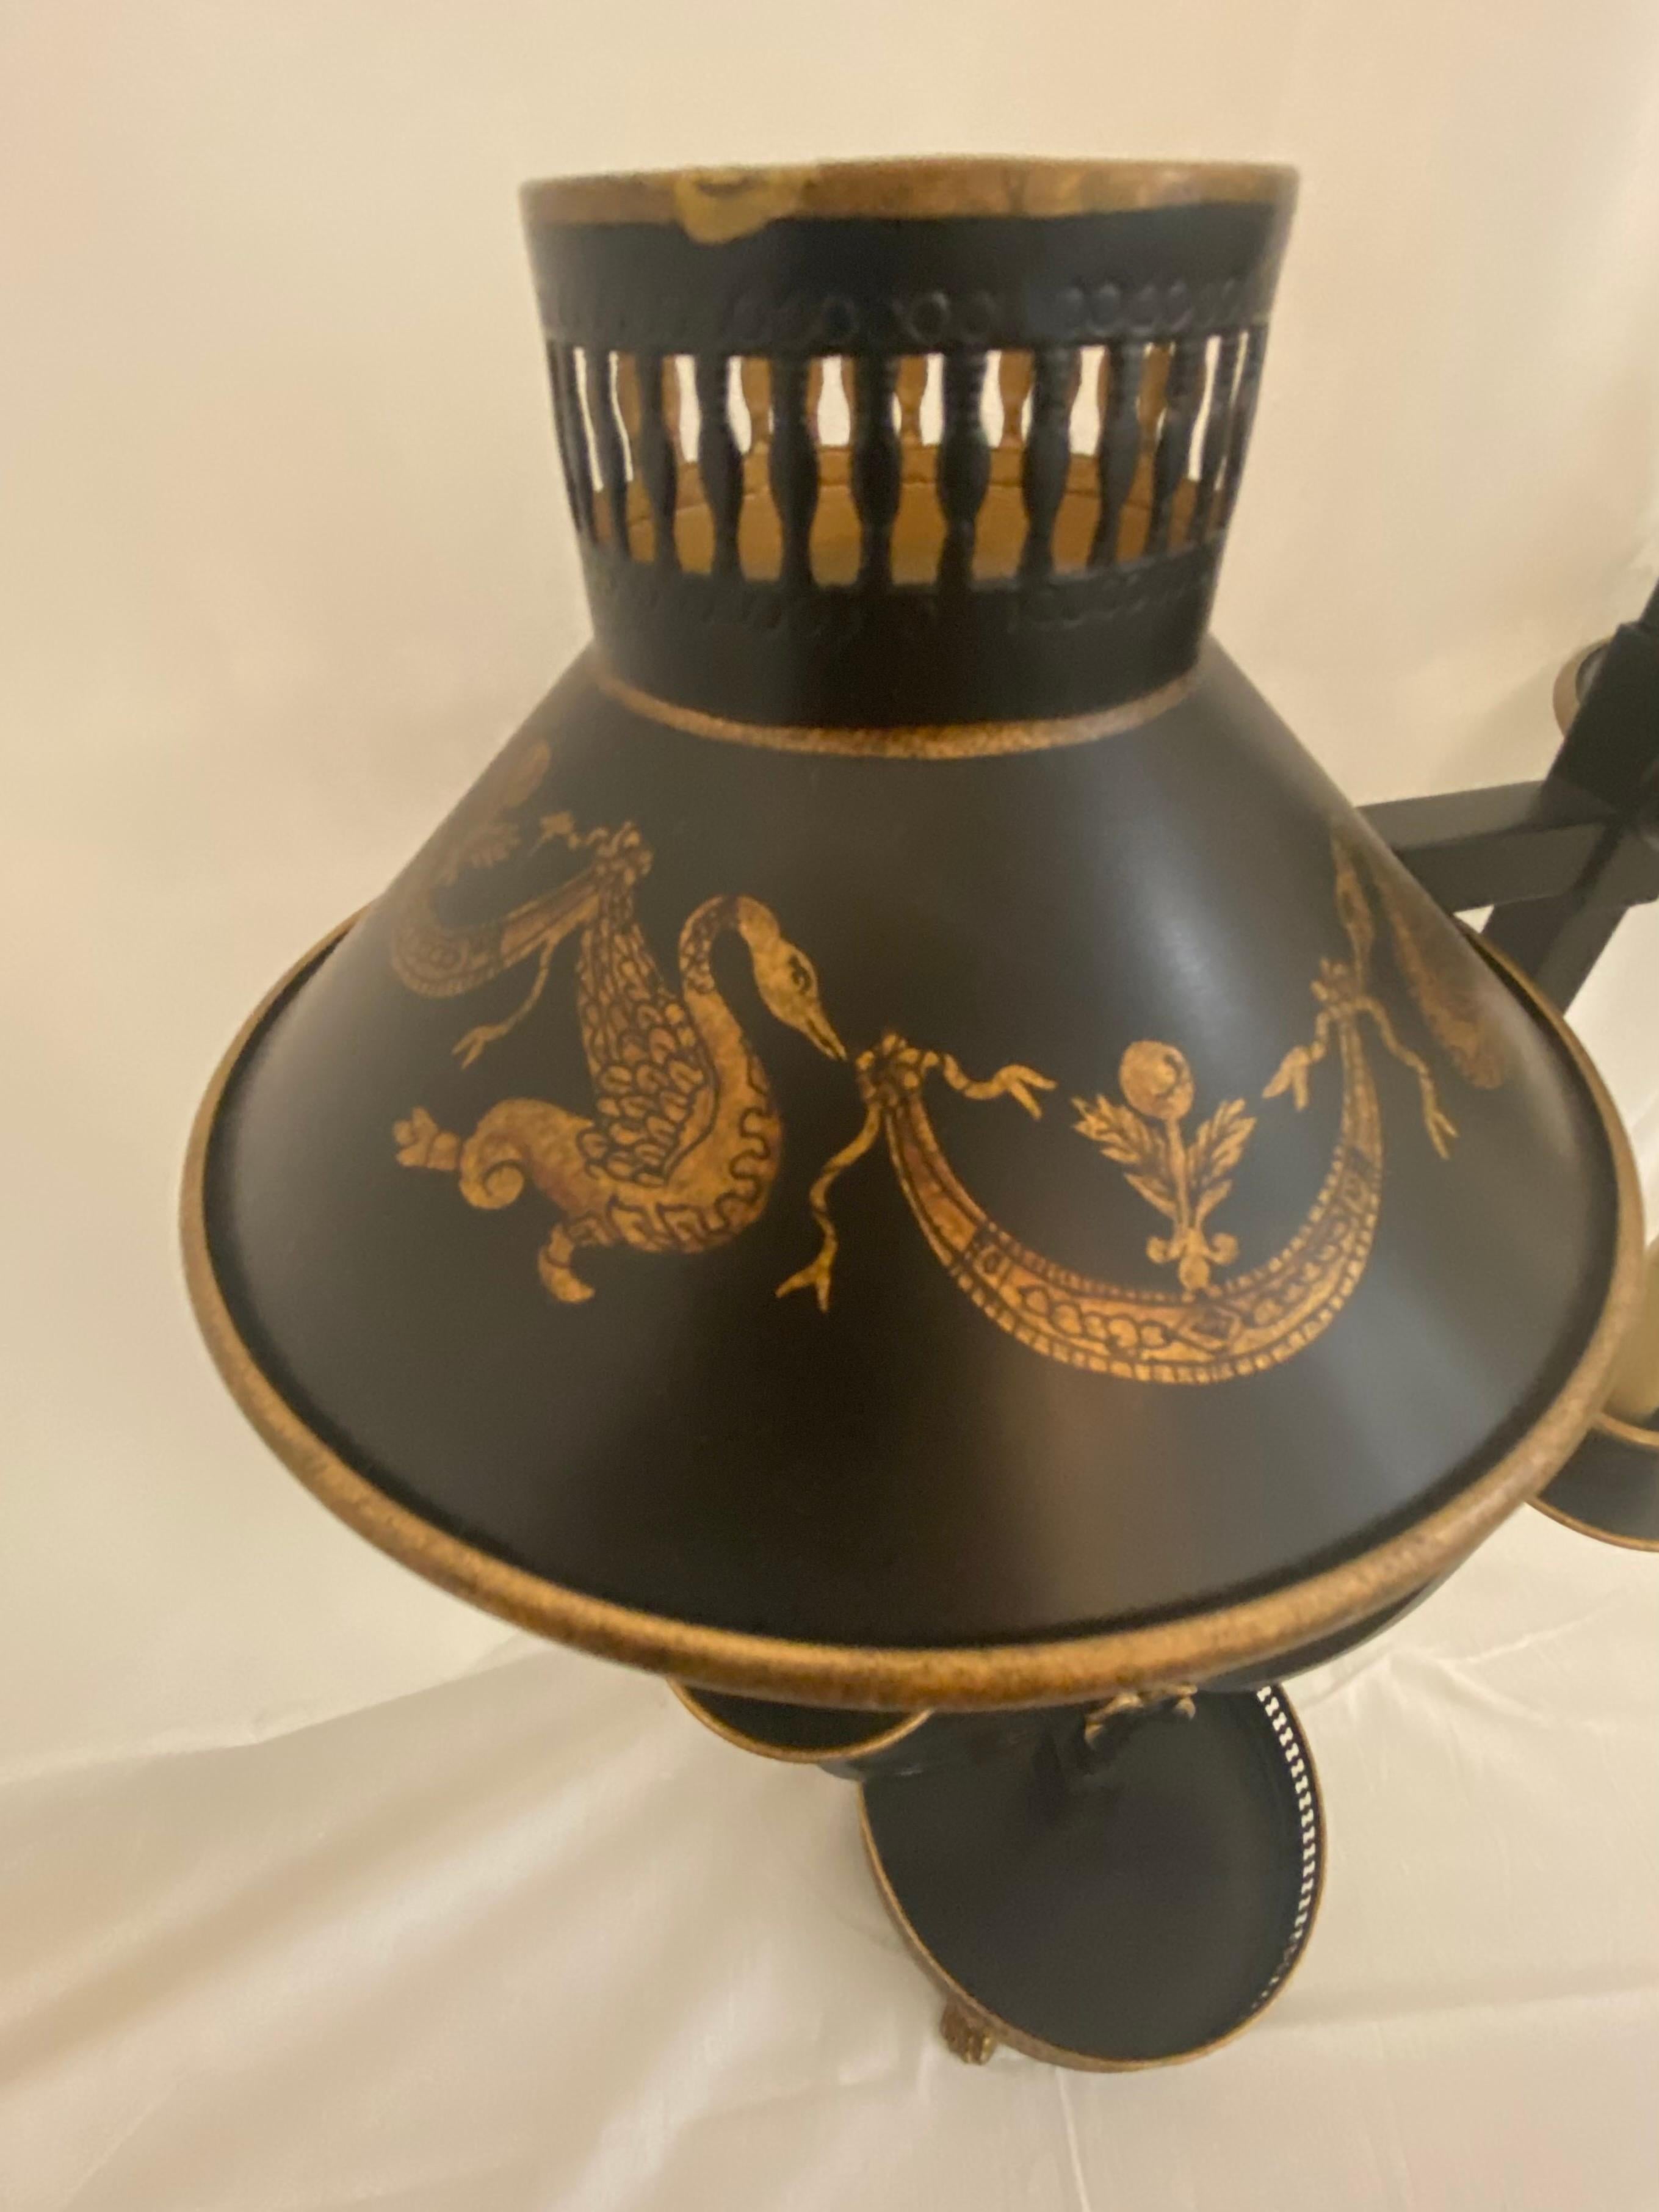 Parcel gilt two-light bouillotte style lamp, Jeanne Reed's Ltd, 21st century, adjustable-height pierced shades, ornamented with stylized swans and swags, central standard supporting two scrolled arms ending in bobeches with faux candles, circular